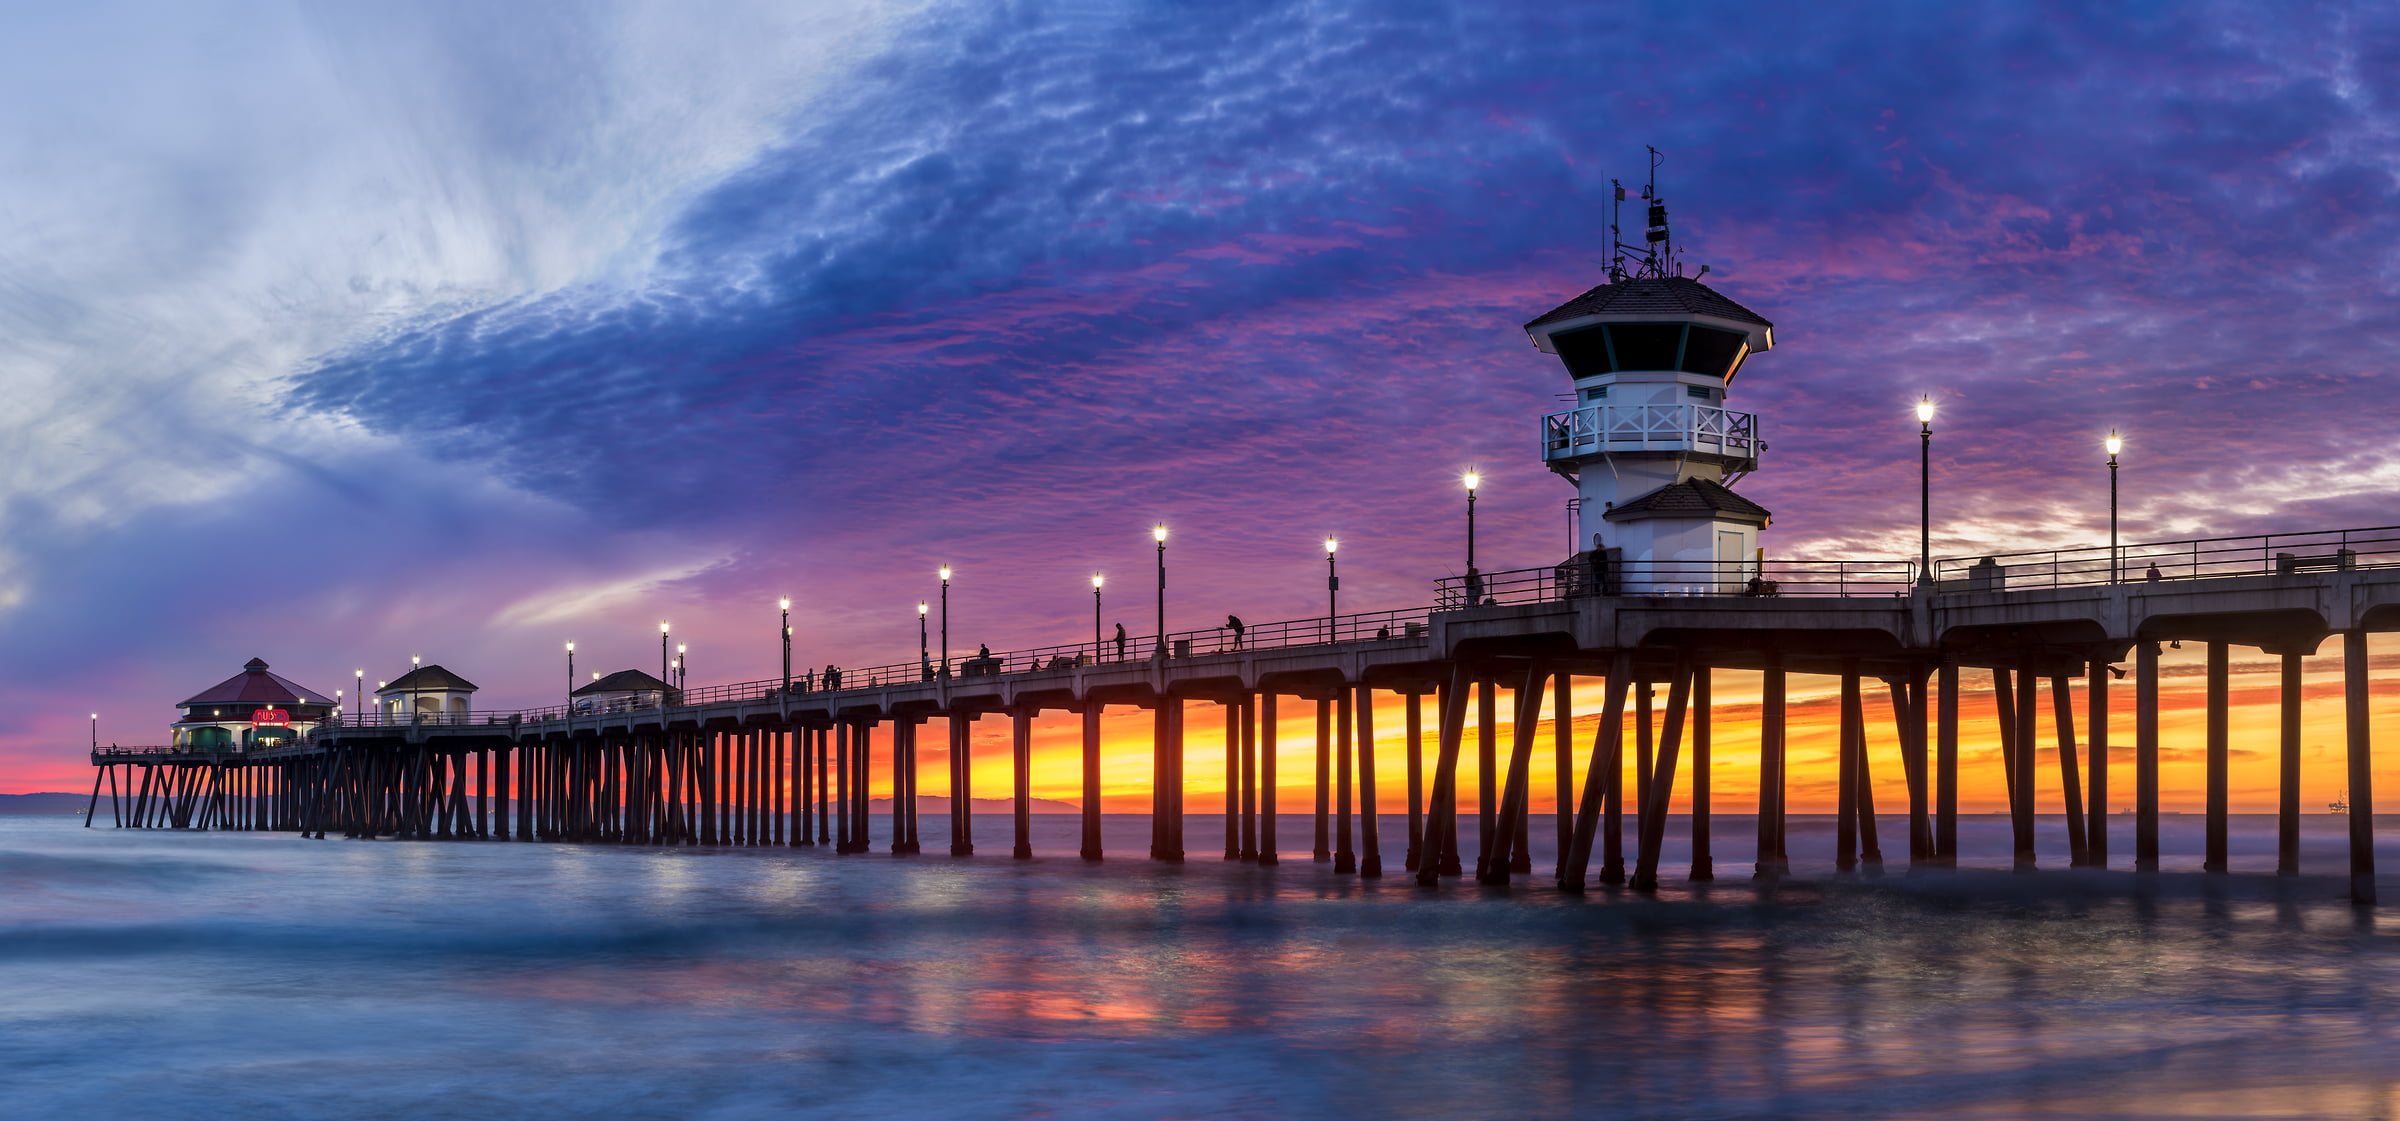 130 megapixels! A very high resolution, large-format VAST photo of the Huntington Beach Pier at sunset; created by Jim Tarpo in Huntington Beach, California.